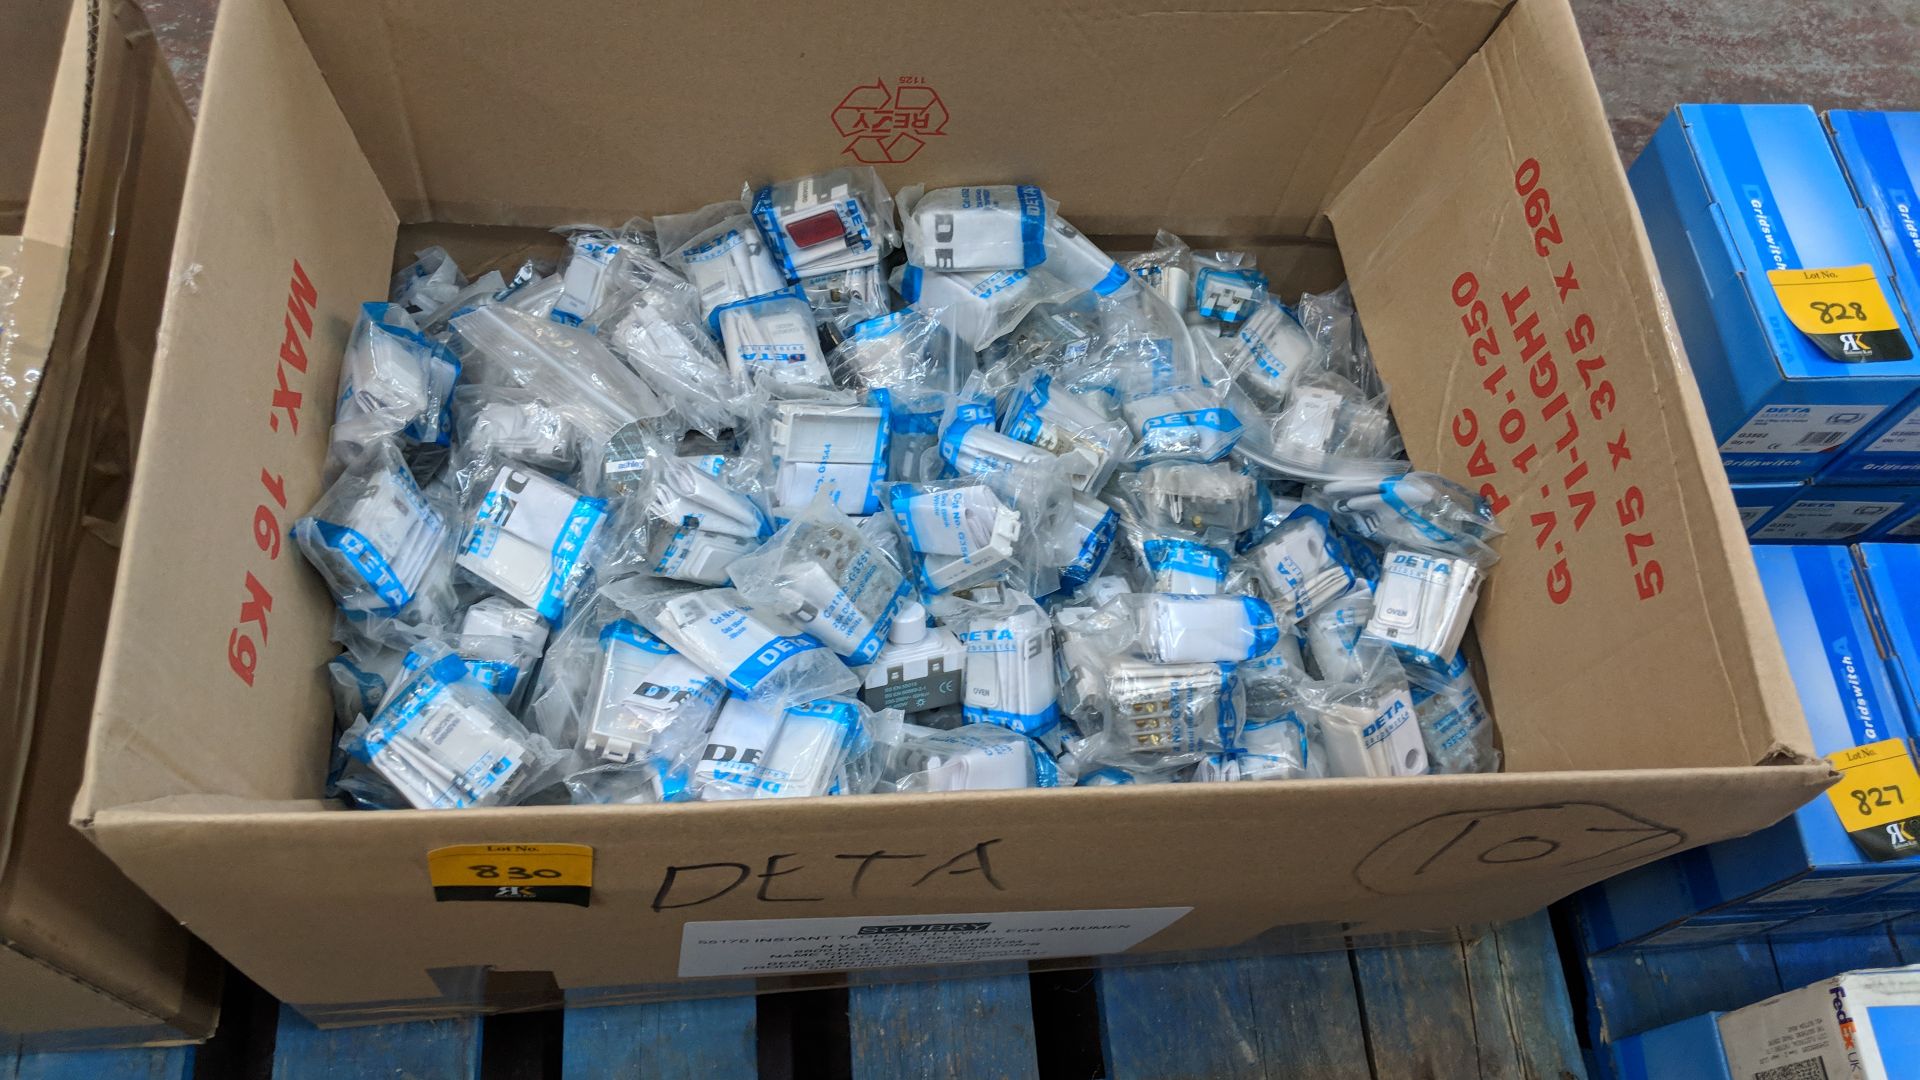 Contents of a crate containing a large quantity of Deta grid switches - crate excluded The vast